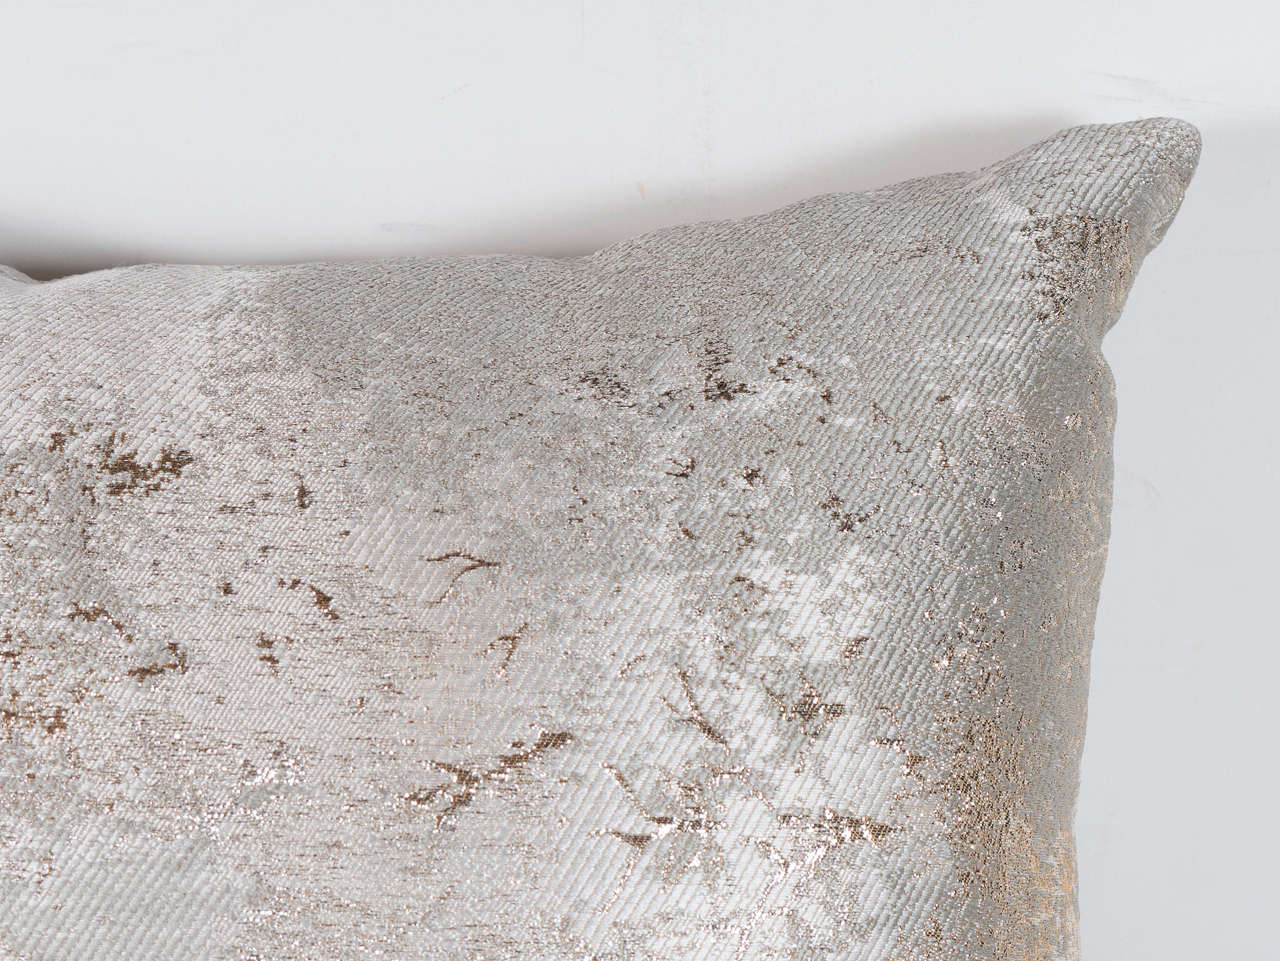 Custom Textured Silver and Pearl Metallic Pillow For Sale at 1stdibs